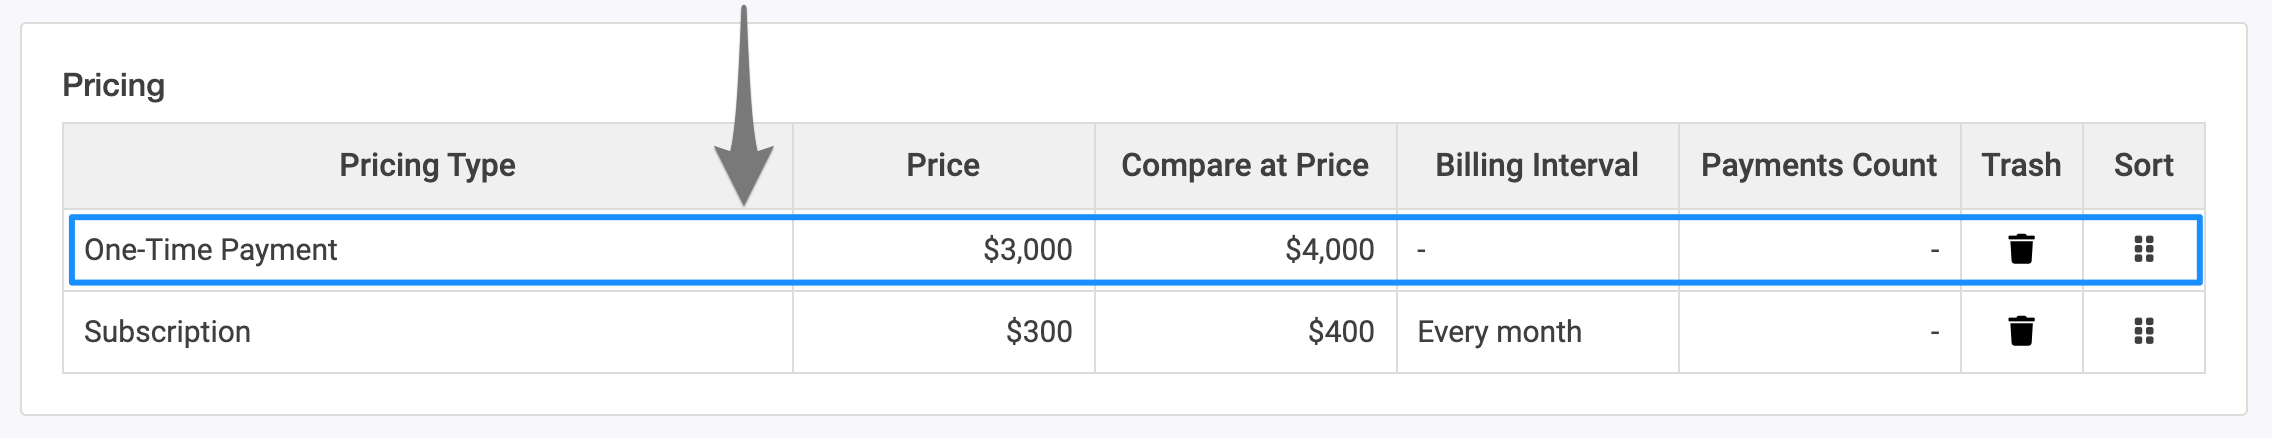 pricing_one_time_row.png